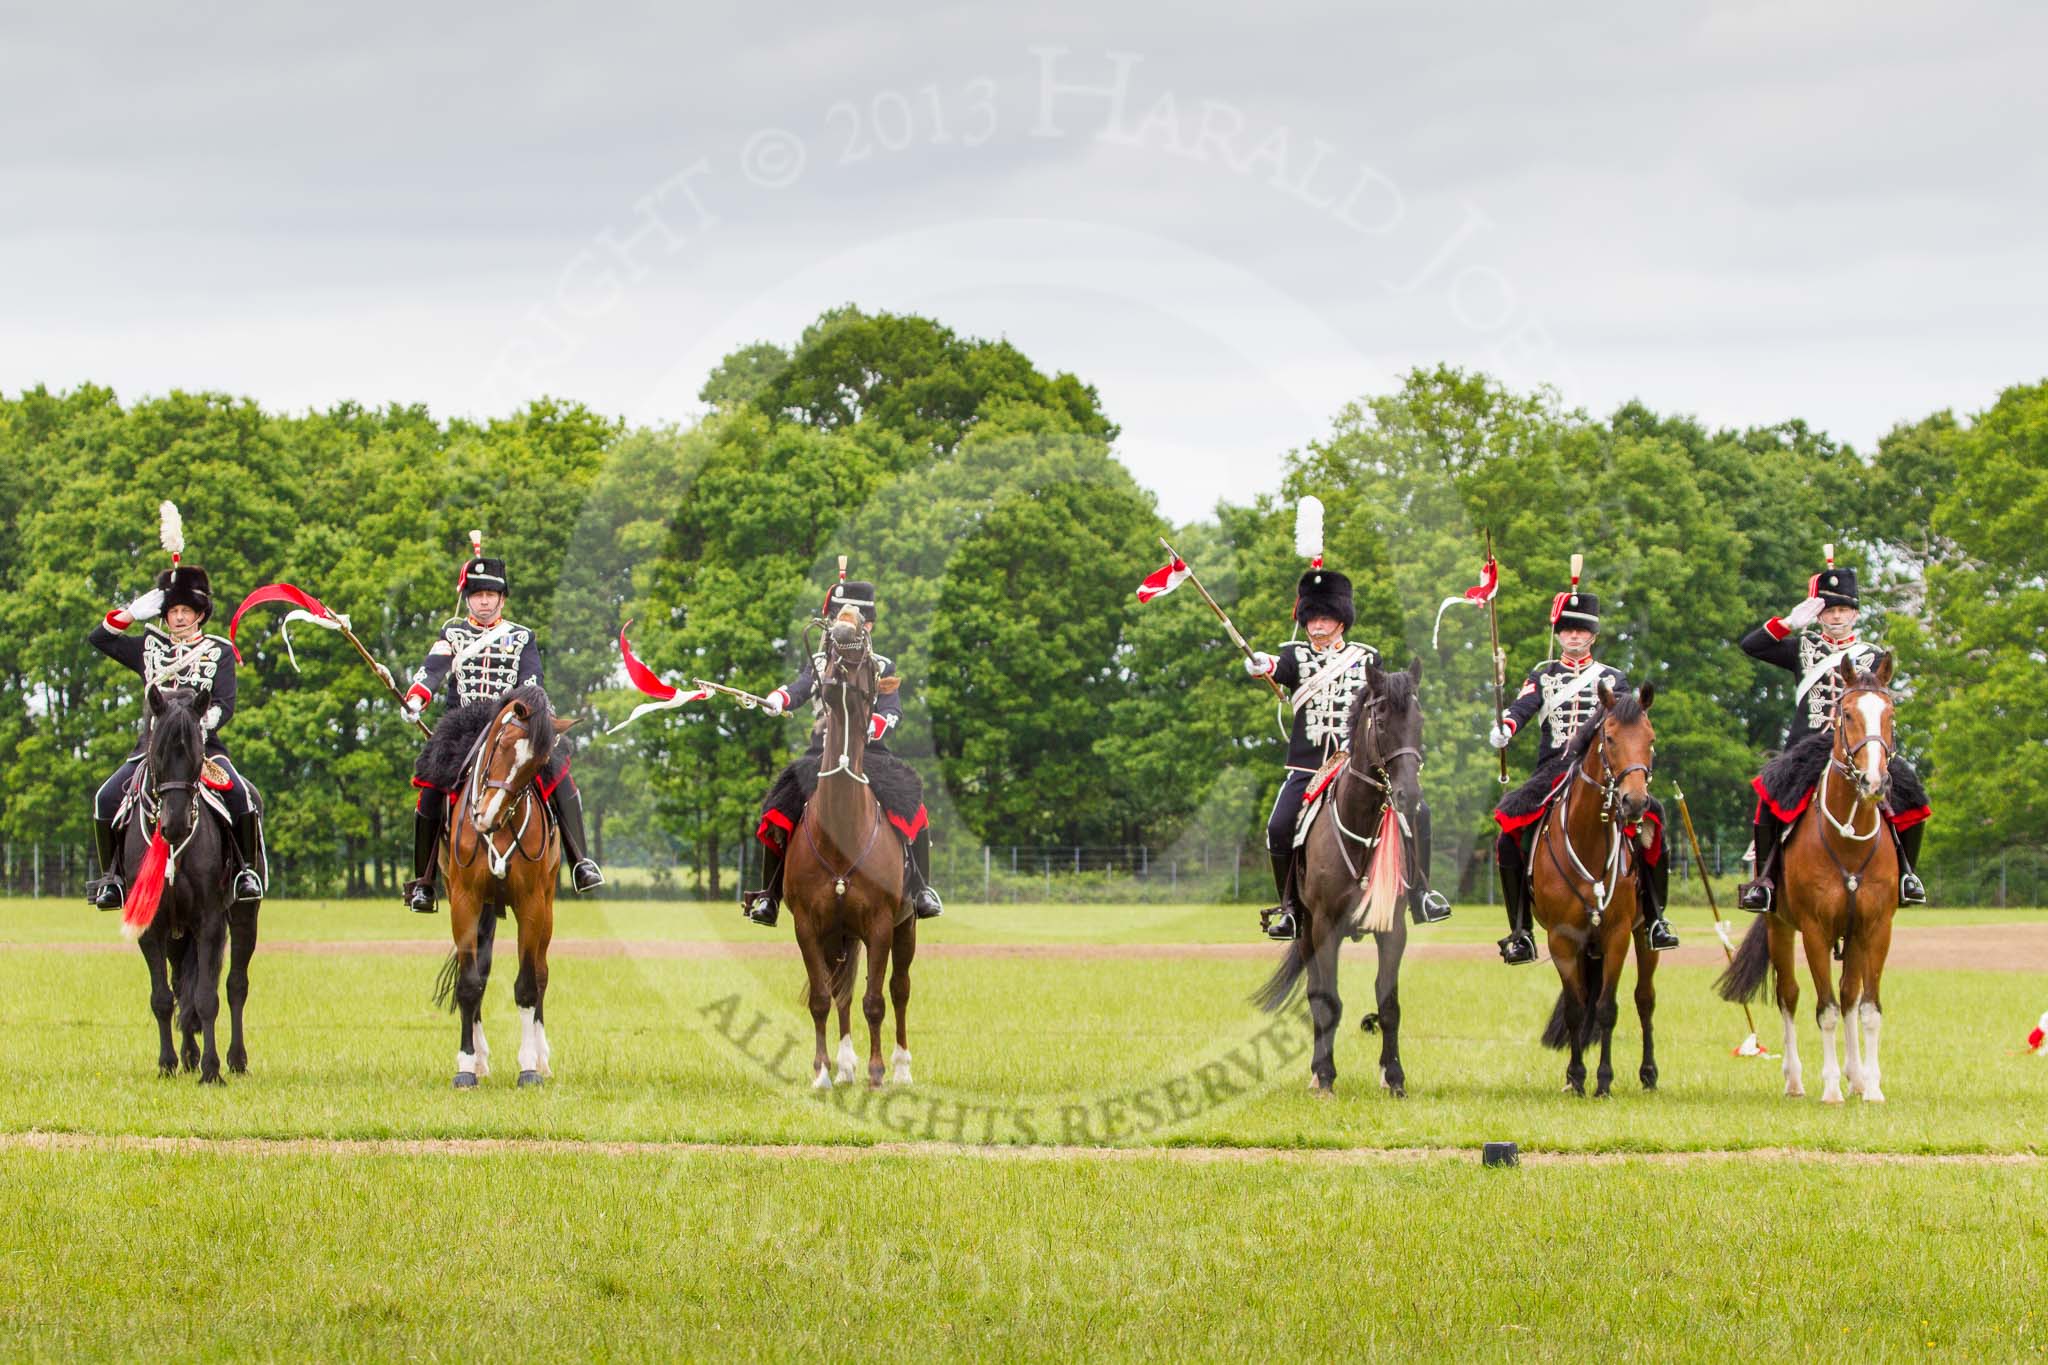 The Light Cavalry HAC Annual Review and Inspection 2013.
Windsor Great Park Review Ground,
Windsor,
Berkshire,
United Kingdom,
on 09 June 2013 at 14:39, image #571